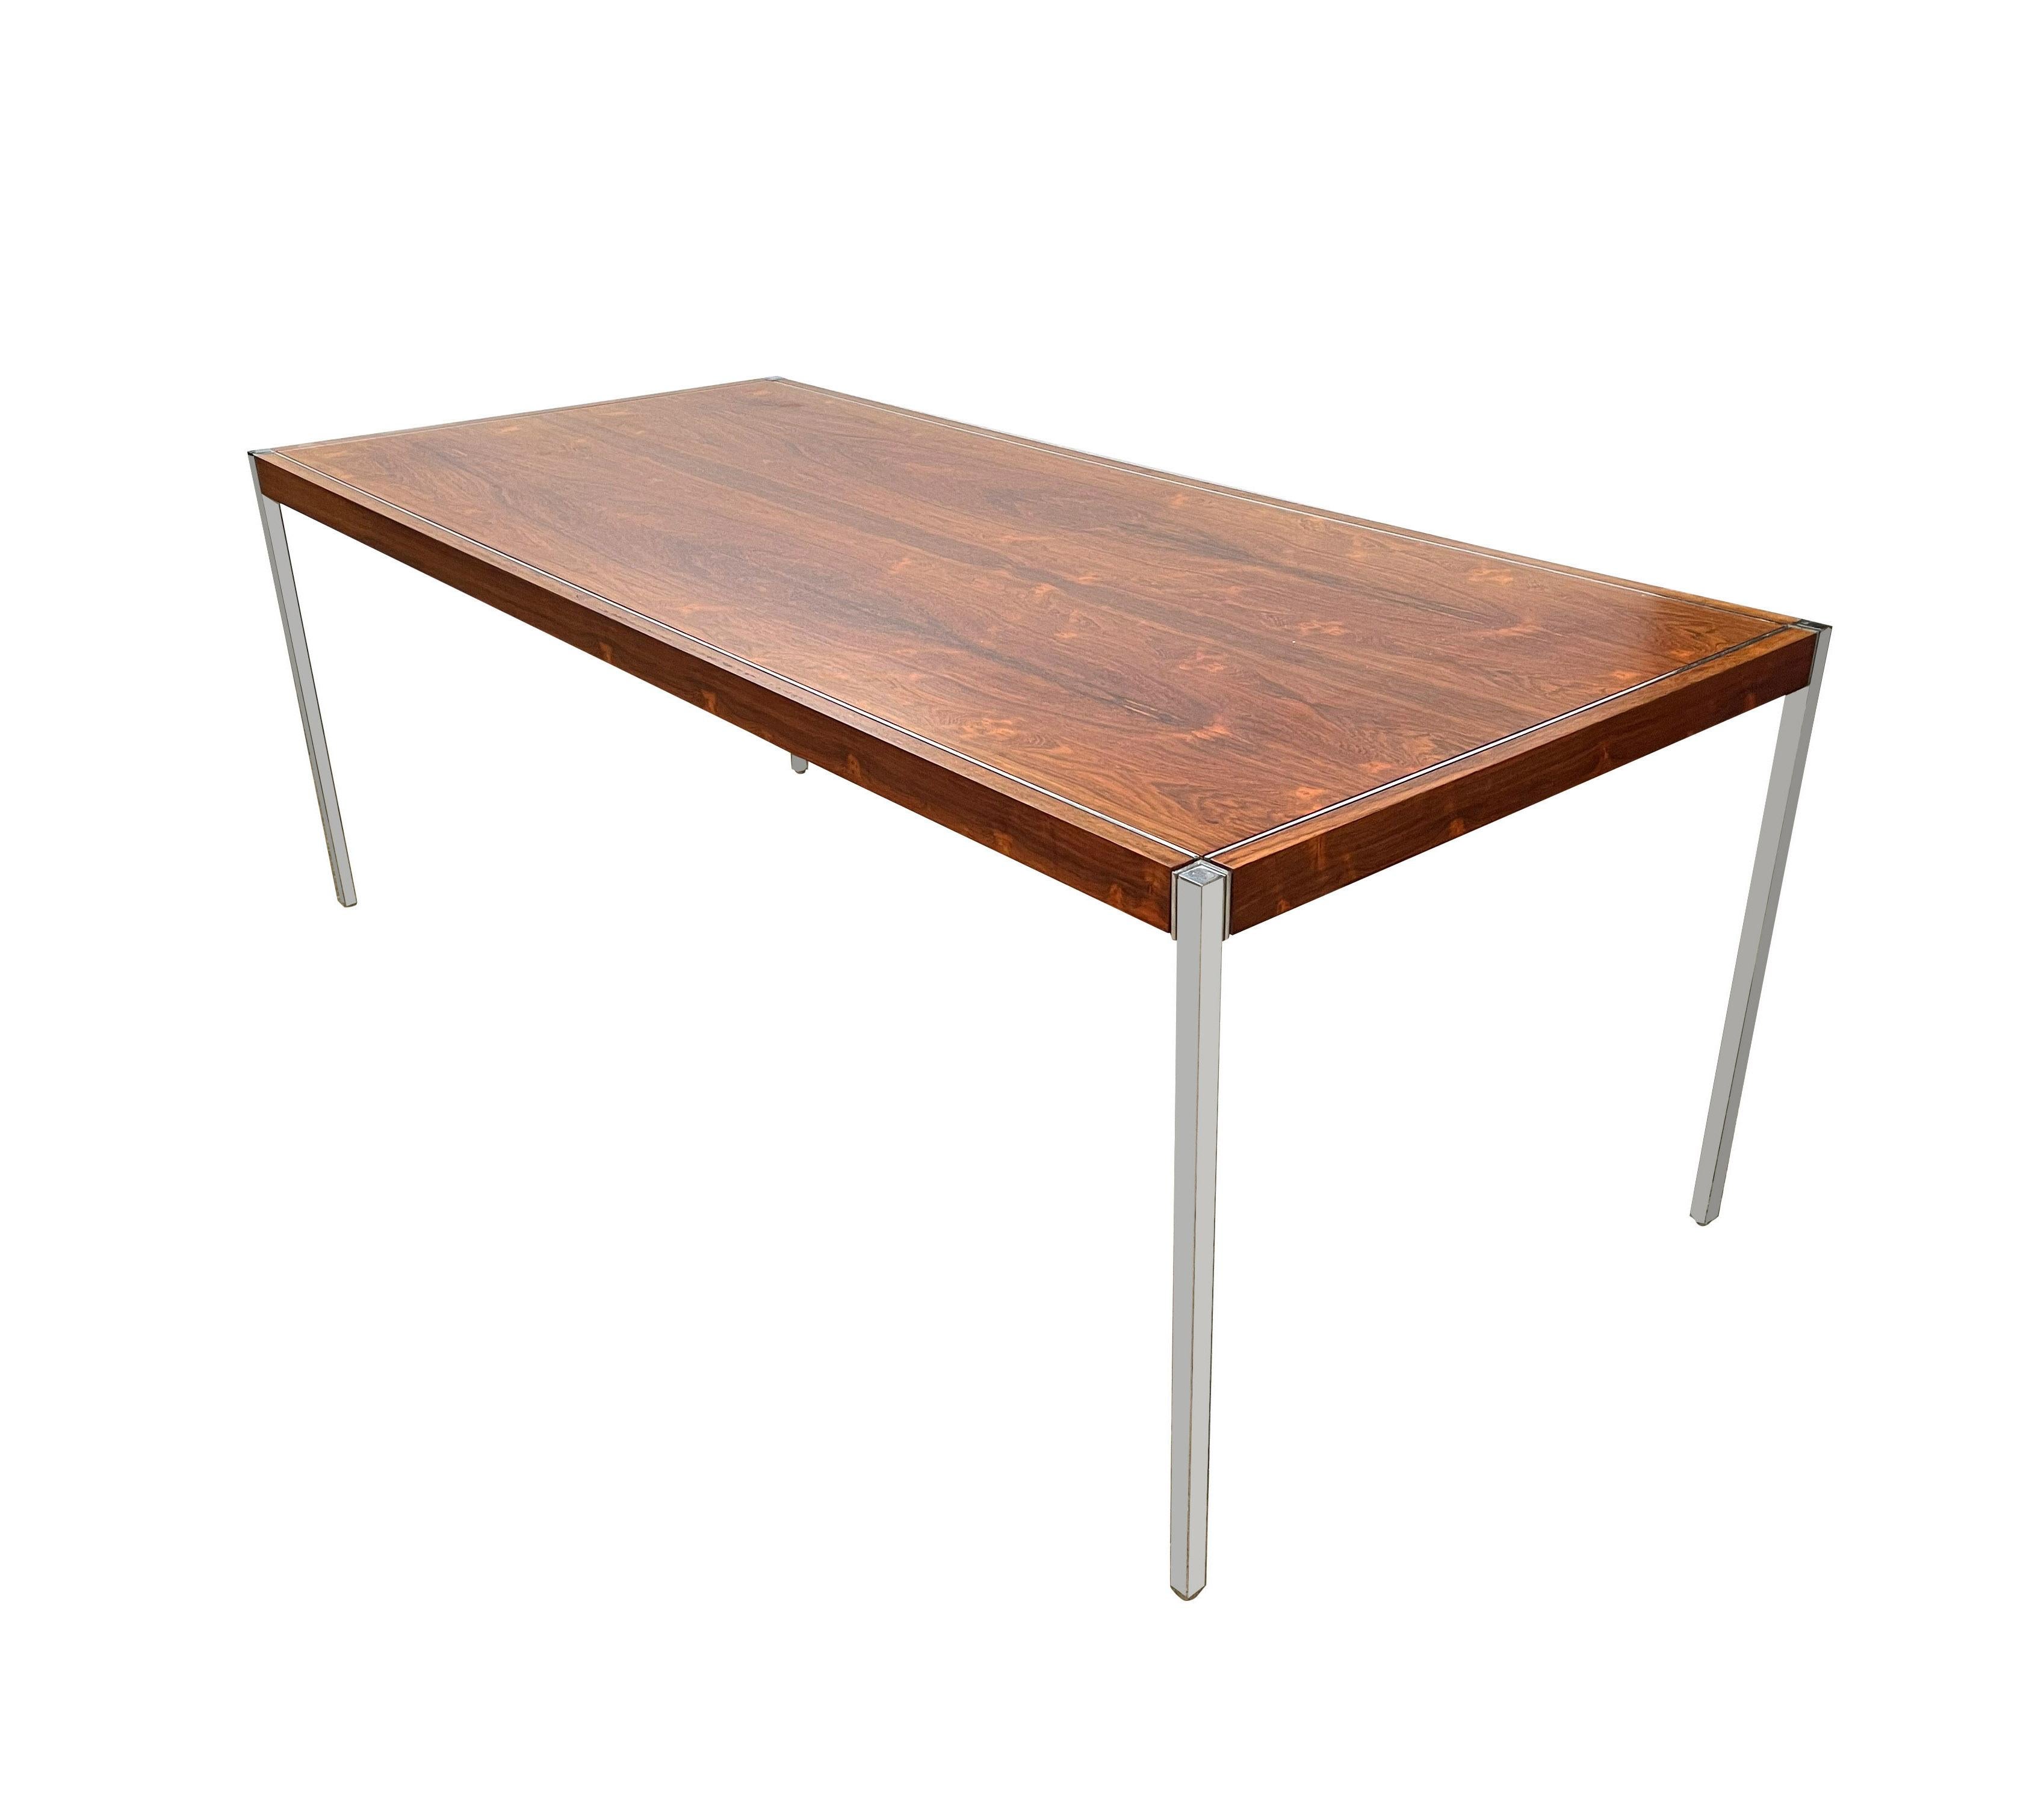 Chrome Mid-Century Modern Richard Schultz Dining Table or Desk in Rosewood for Knoll